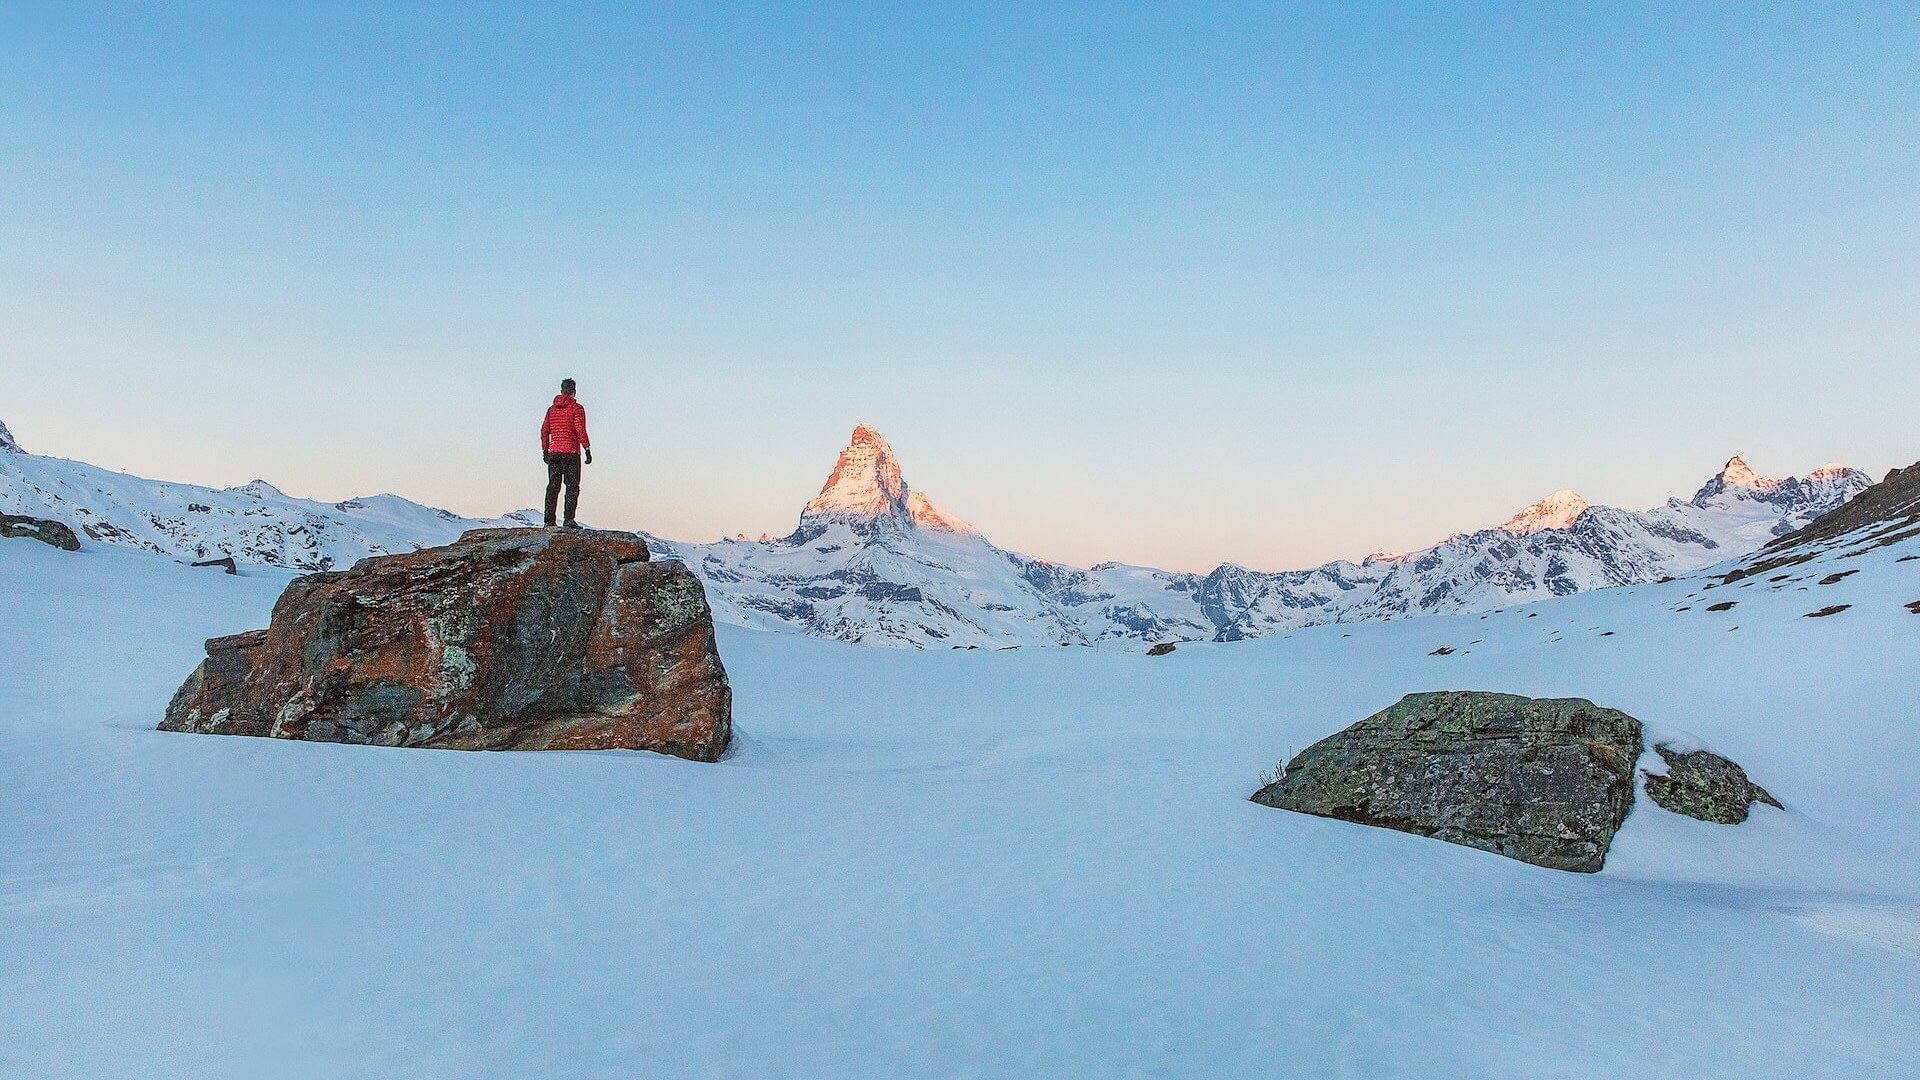 Winter Camps for climbing in Swiss boarding schools